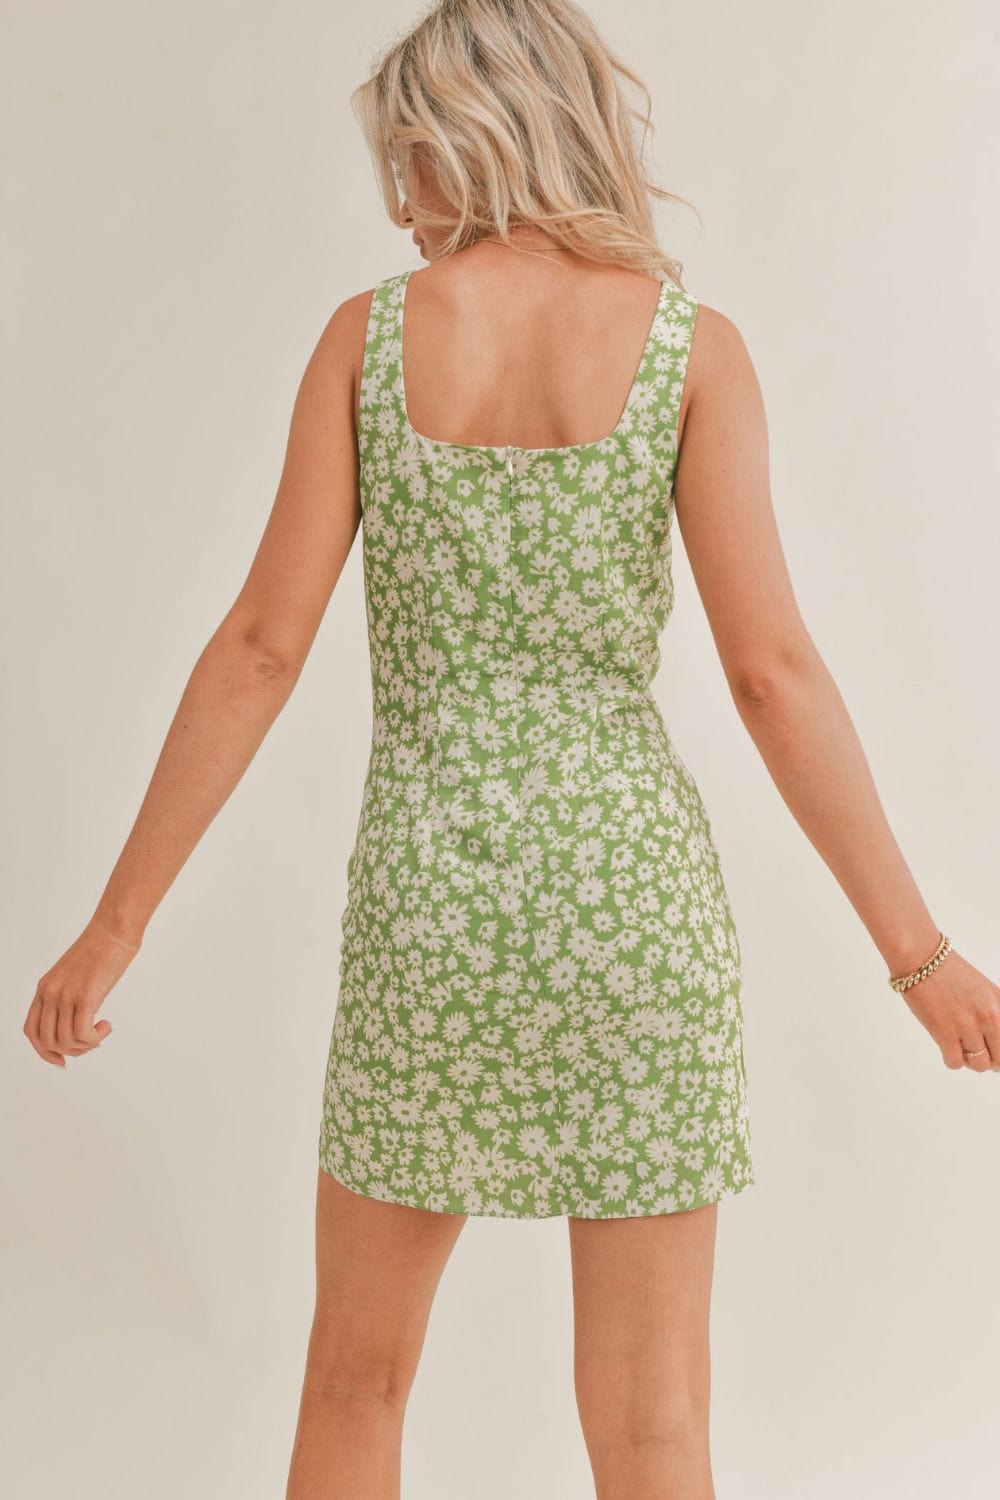 Green Garden Floral Mini Dress by Sage The Label - Dresses - Blooming Daily